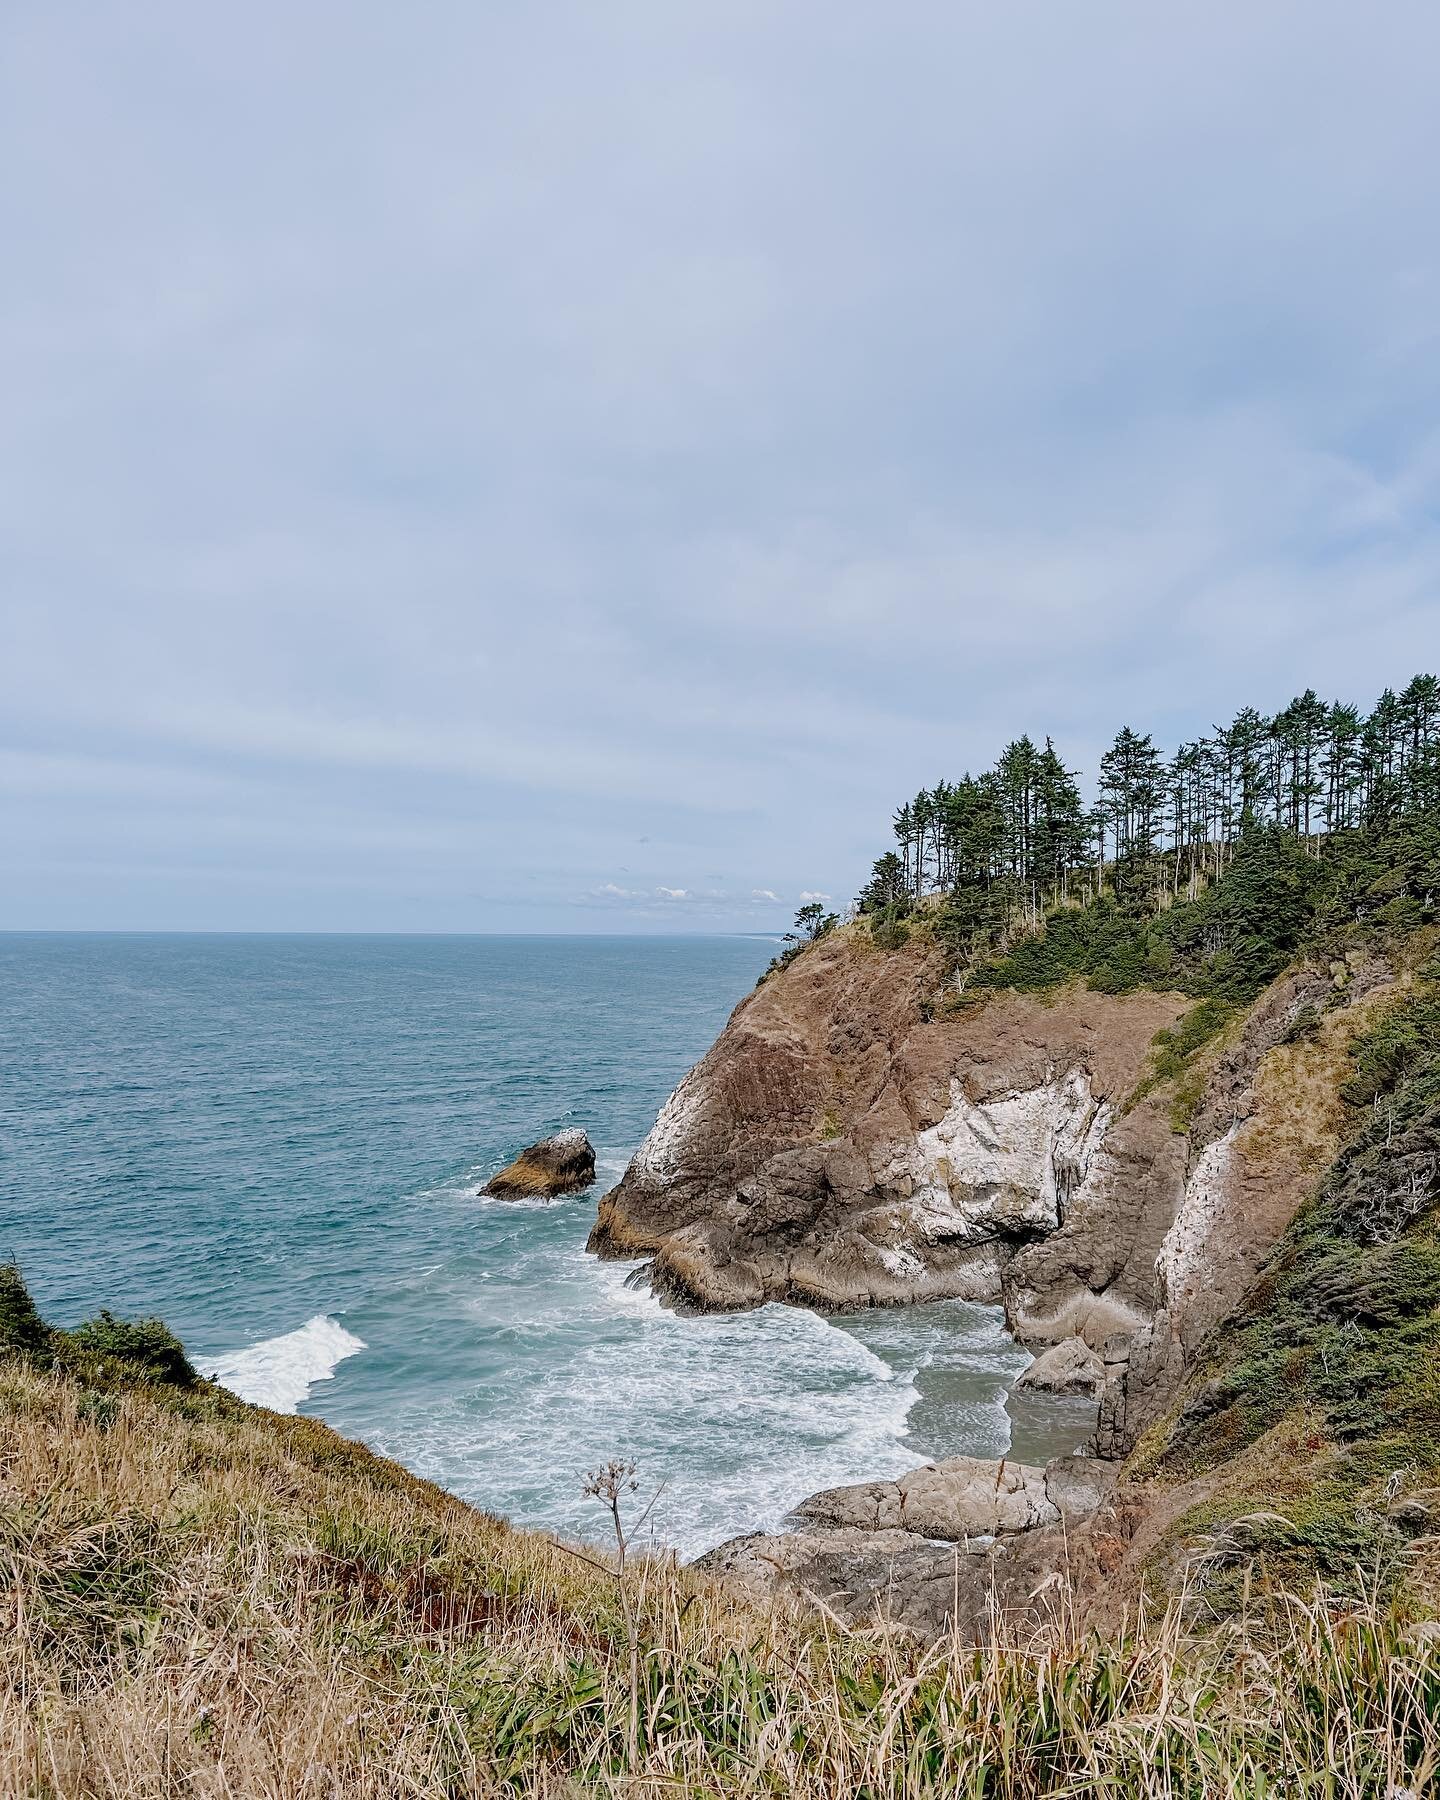 Cape Disappointment is not appropriately named.